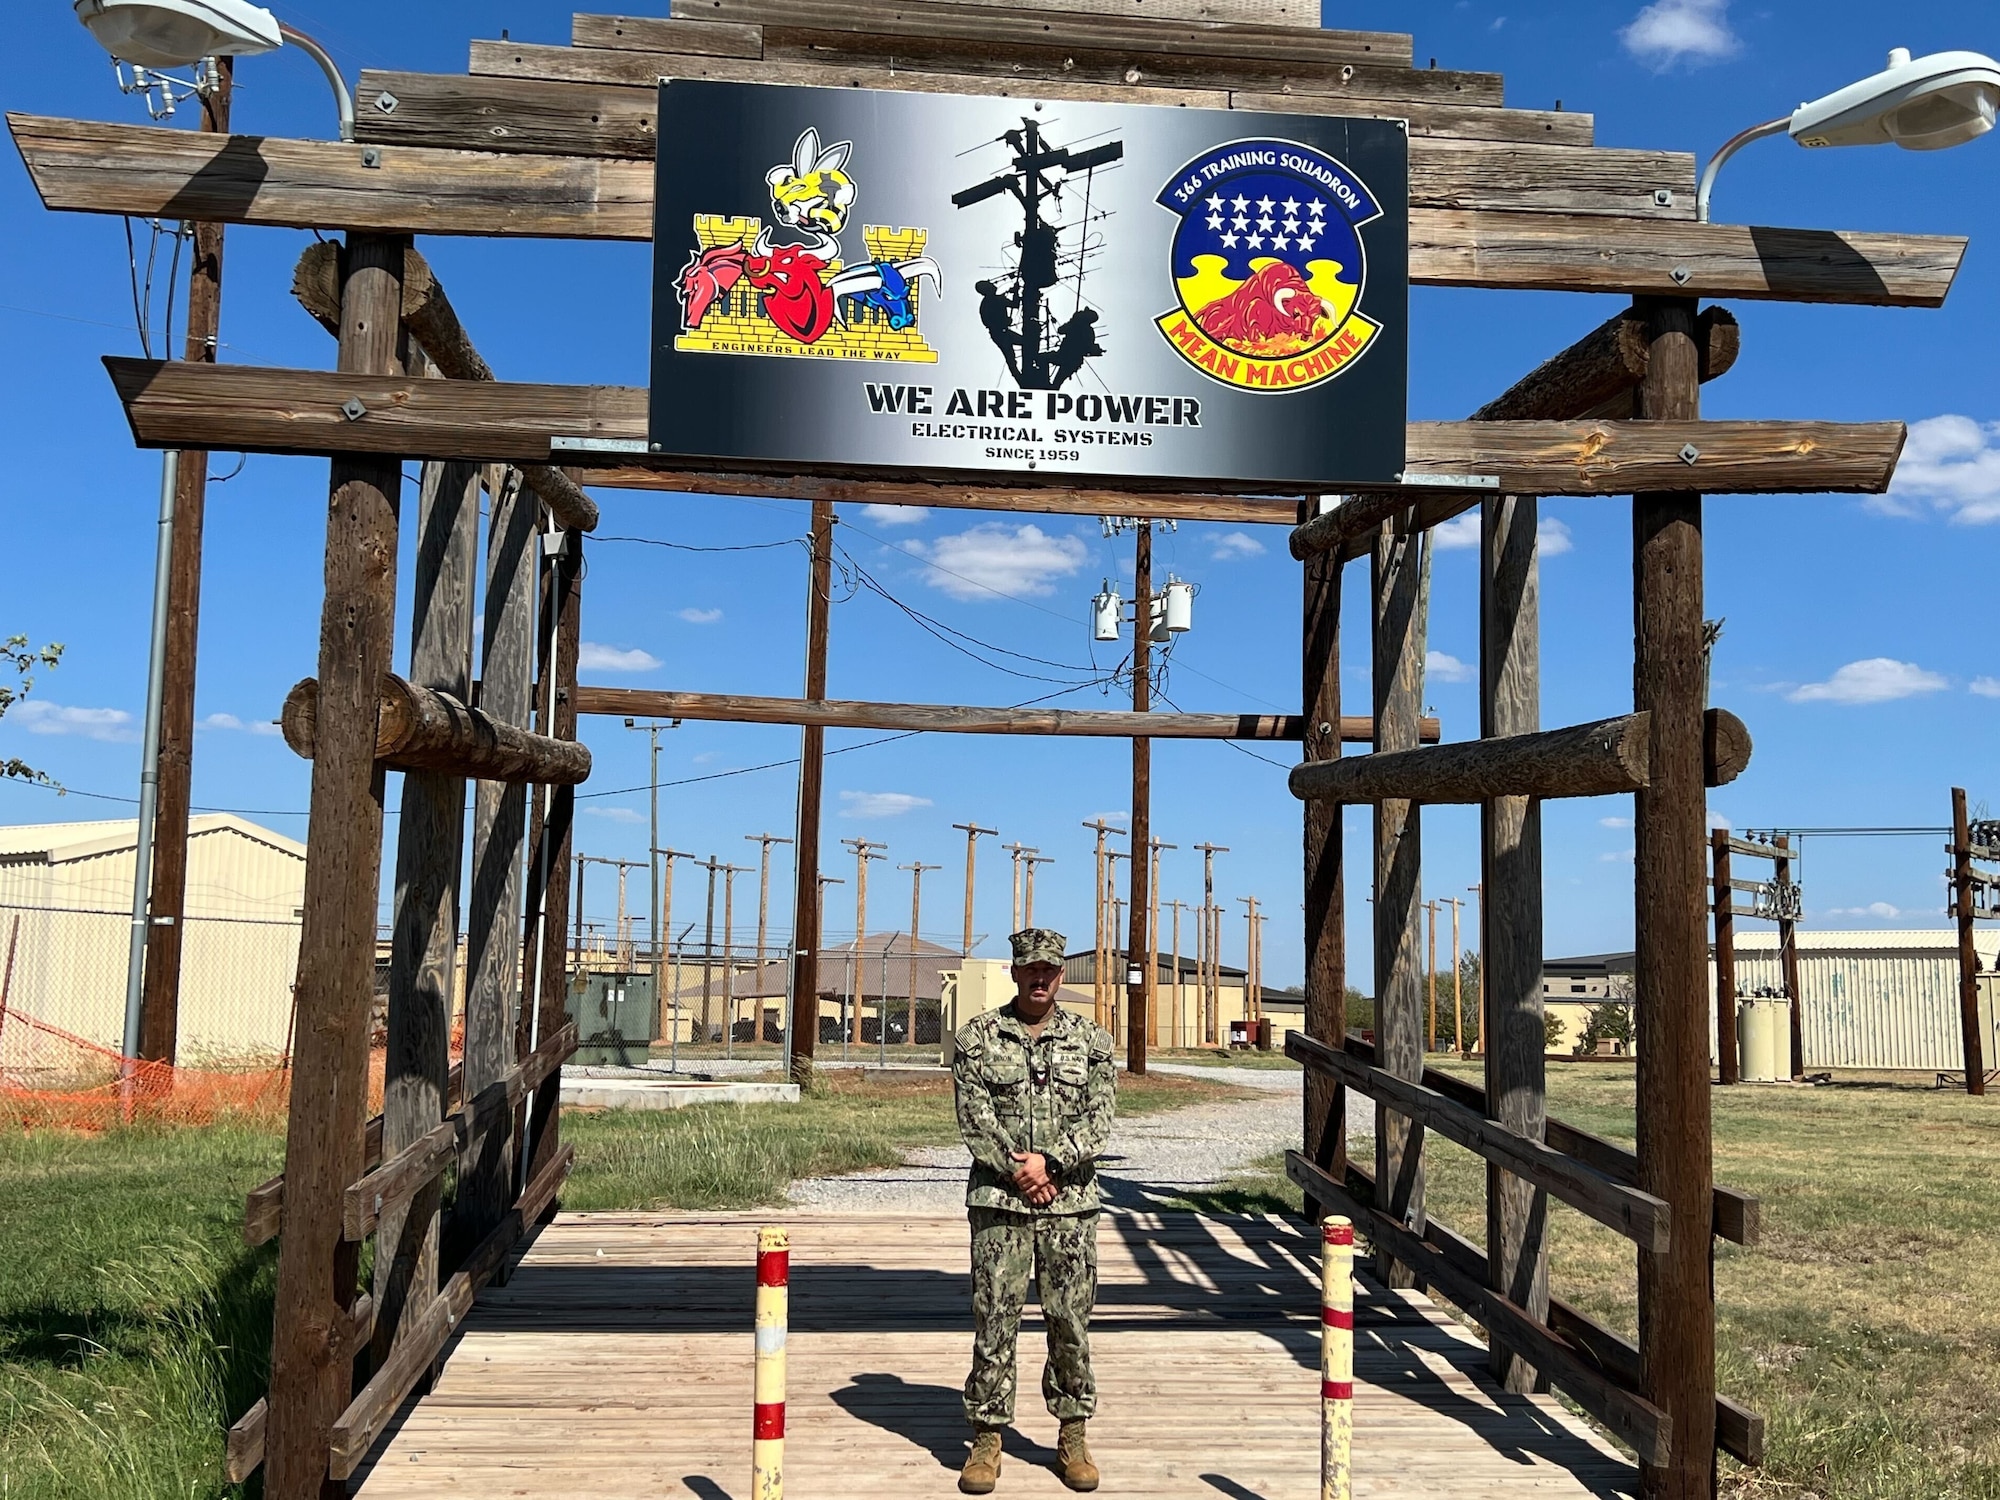 A Seabee stands under a wooden gate with utility poles in the background